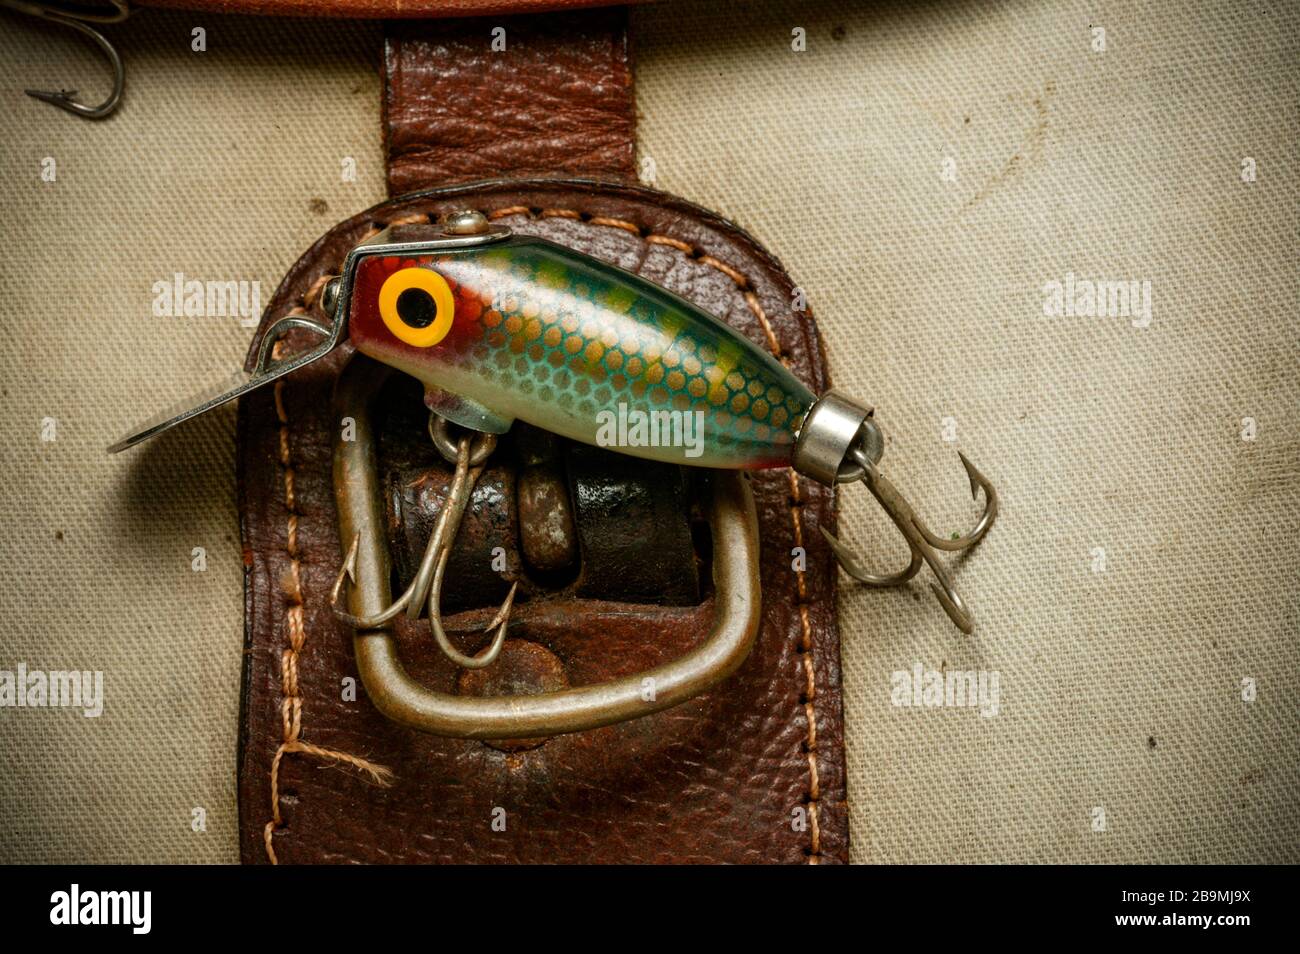 An example of a vintage fishing lure equipped with treble hooks